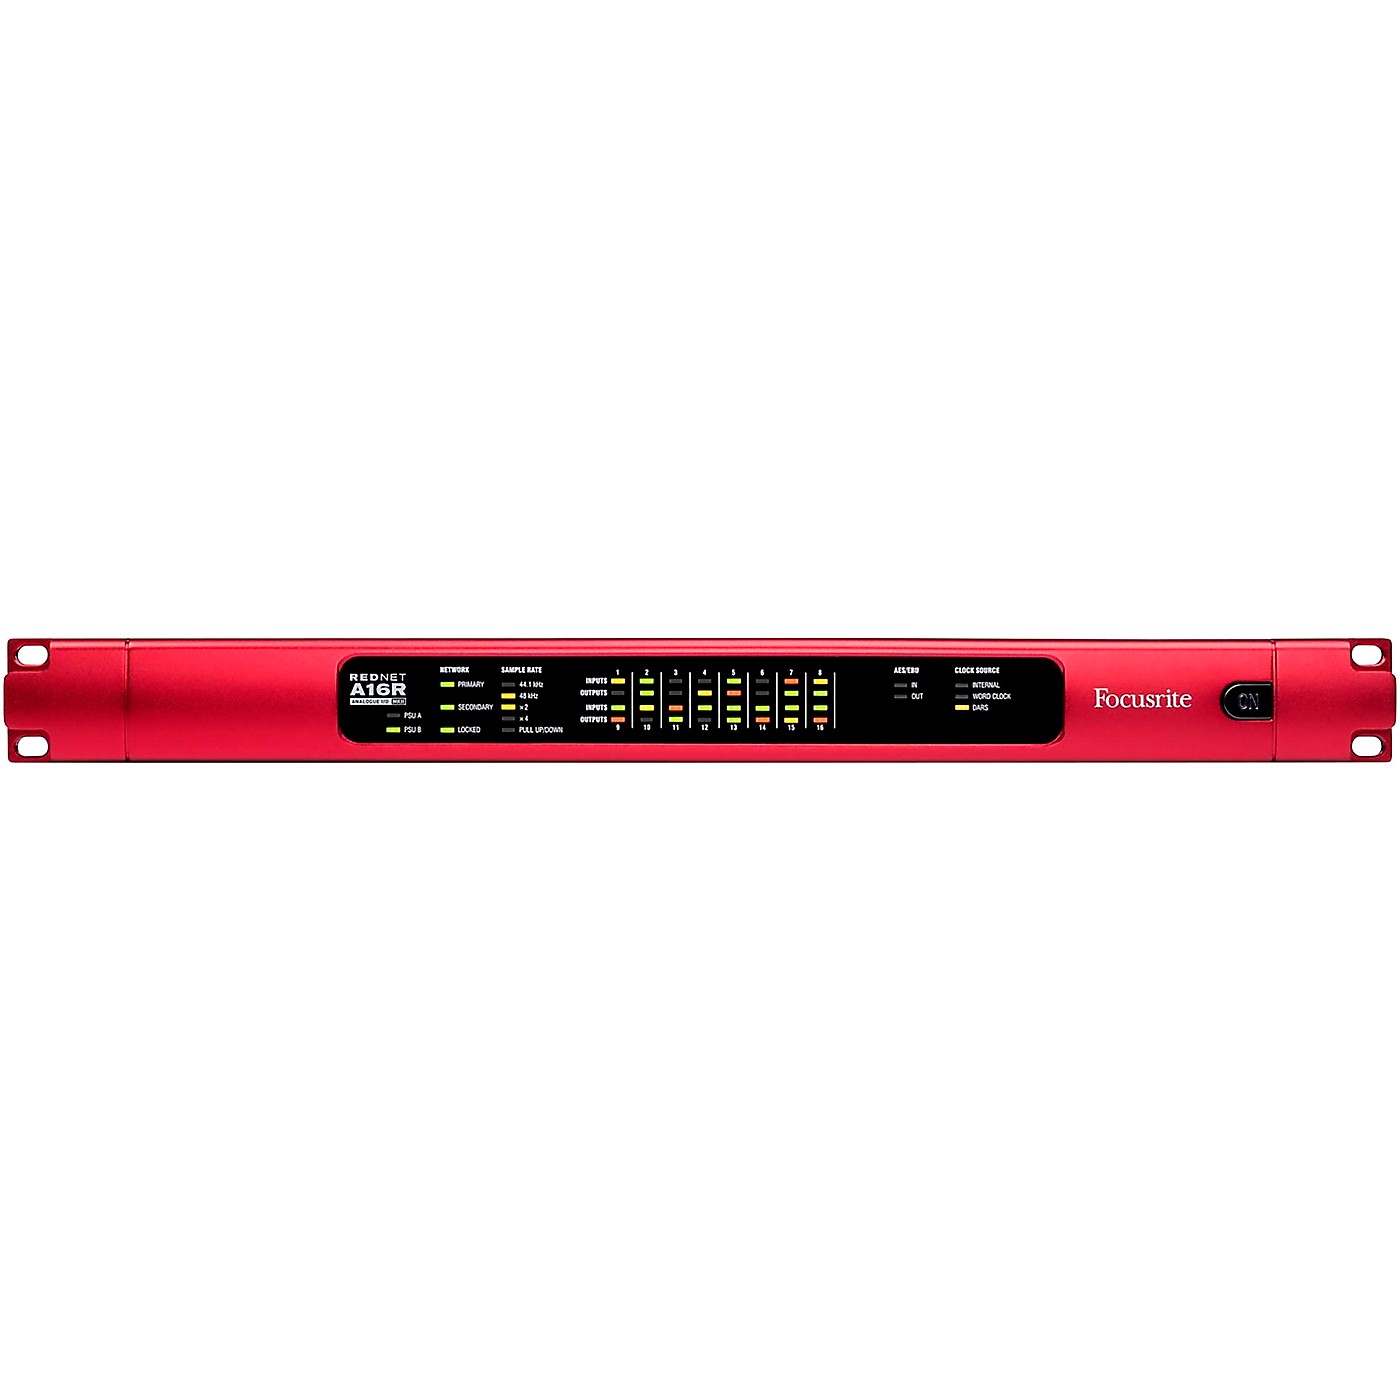 Focusrite RedNet A16R MkII 16-channel Bi-Directional Analog Interface for Dante Networks thumbnail